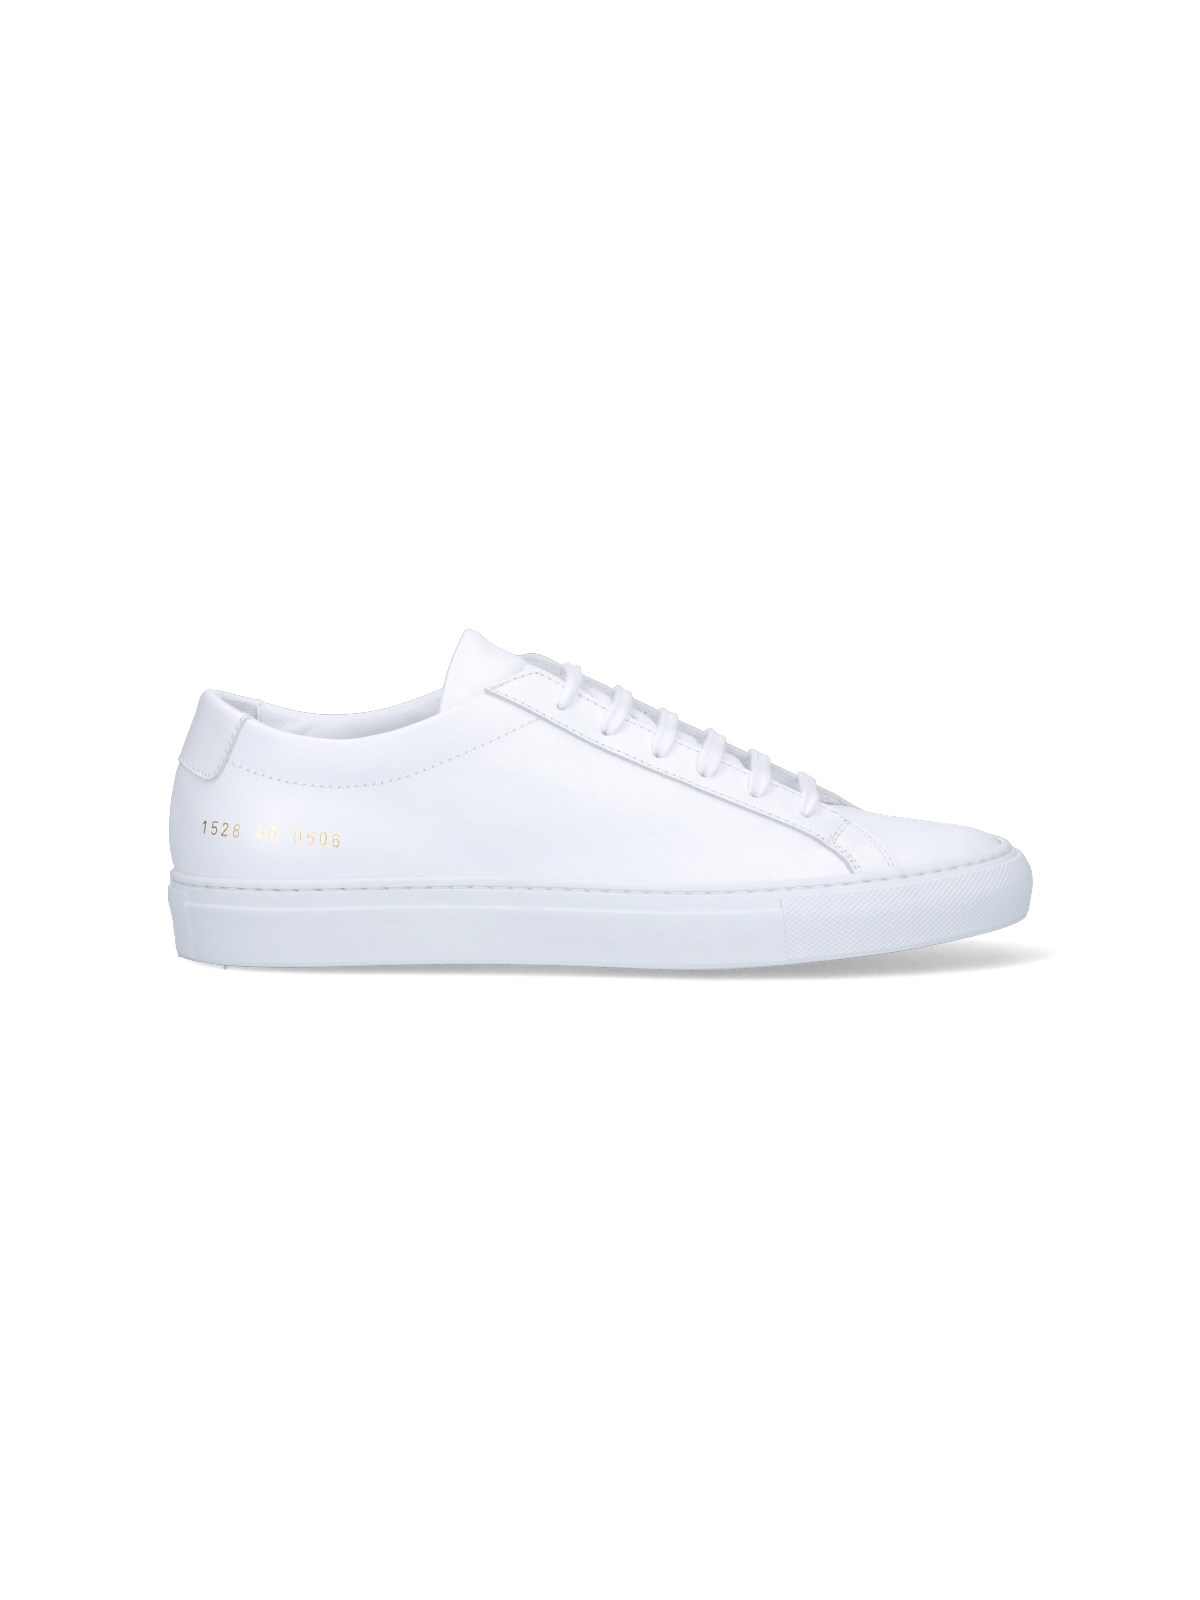 COMMON PROJECTS ORIGINAL 'ACHILLES' SNEAKERS